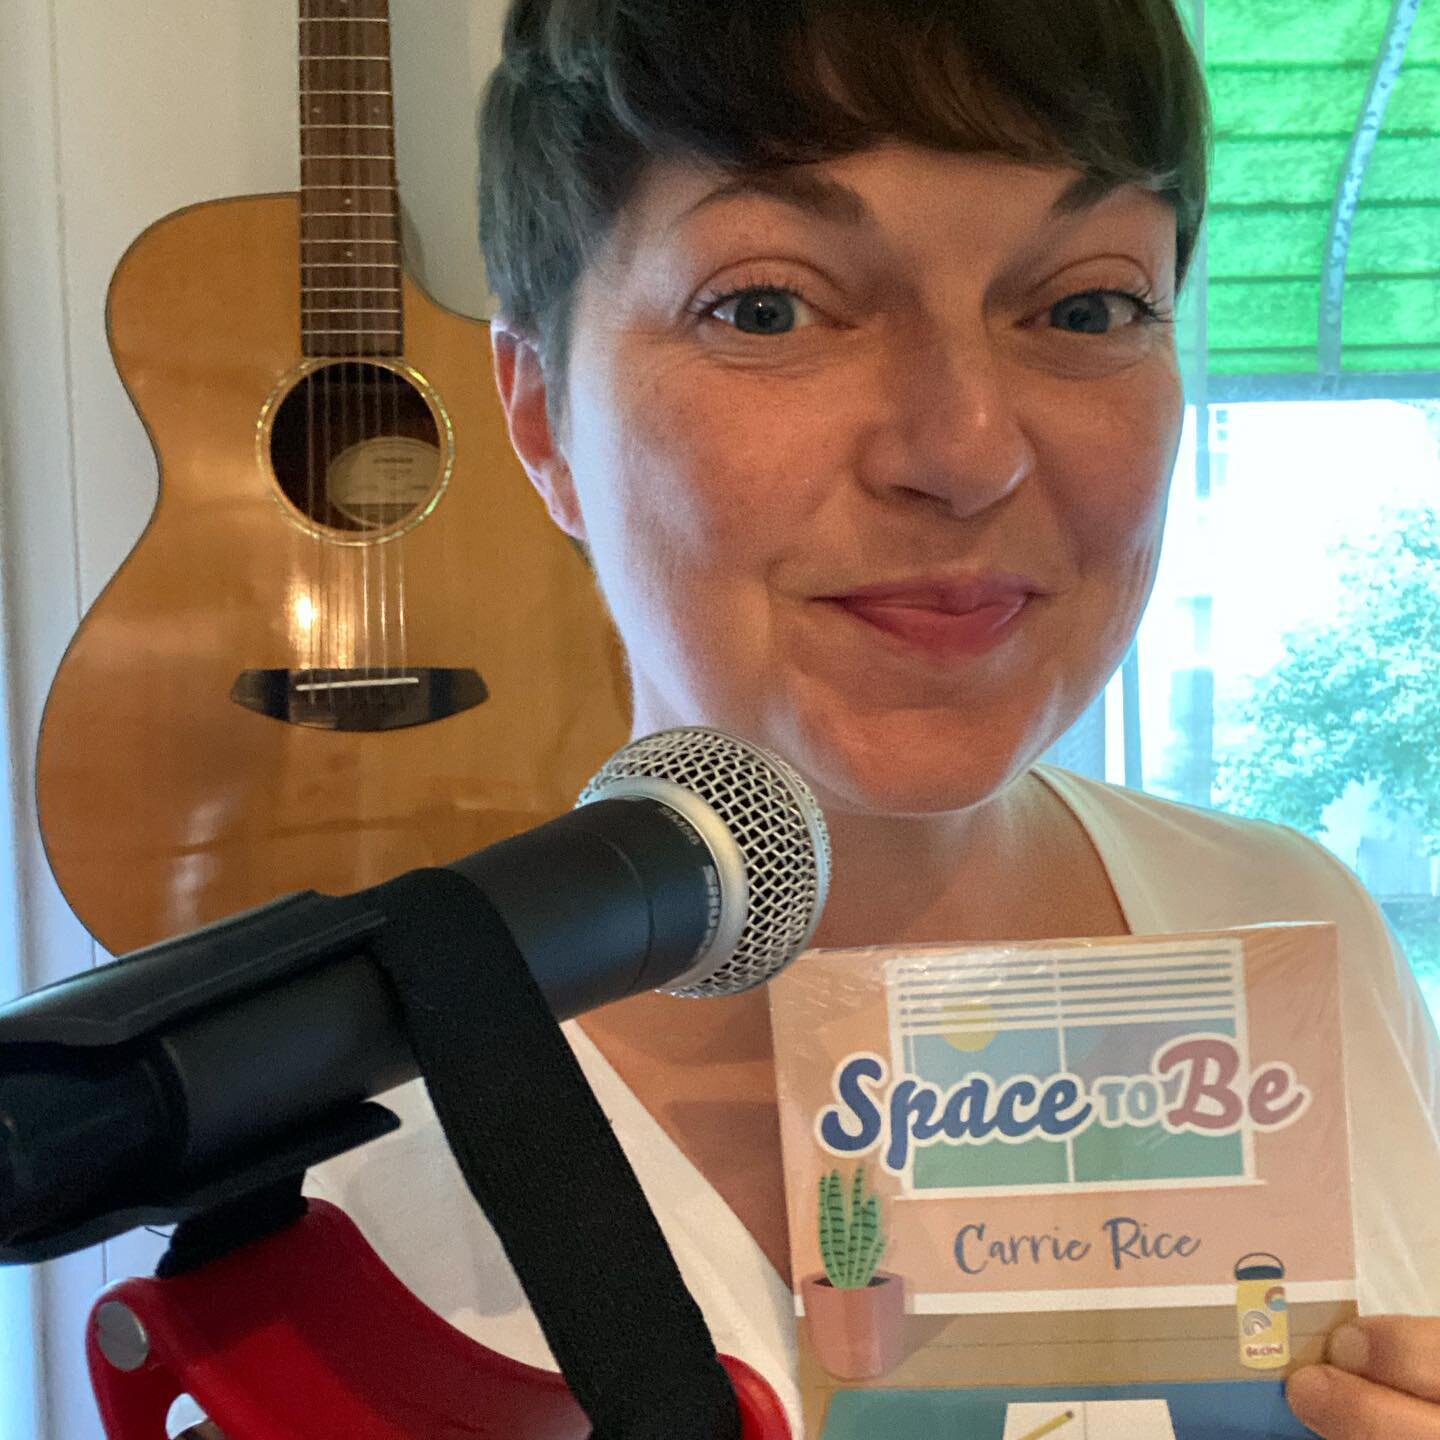 Handed off several copies of the CD today to @bexyoga8 so she could hold and listen to our final product! So fun 🤩 #youthyogaschool #myspacetobe #spacetobe #youthyogateacher #comingsoon #streamingsoon